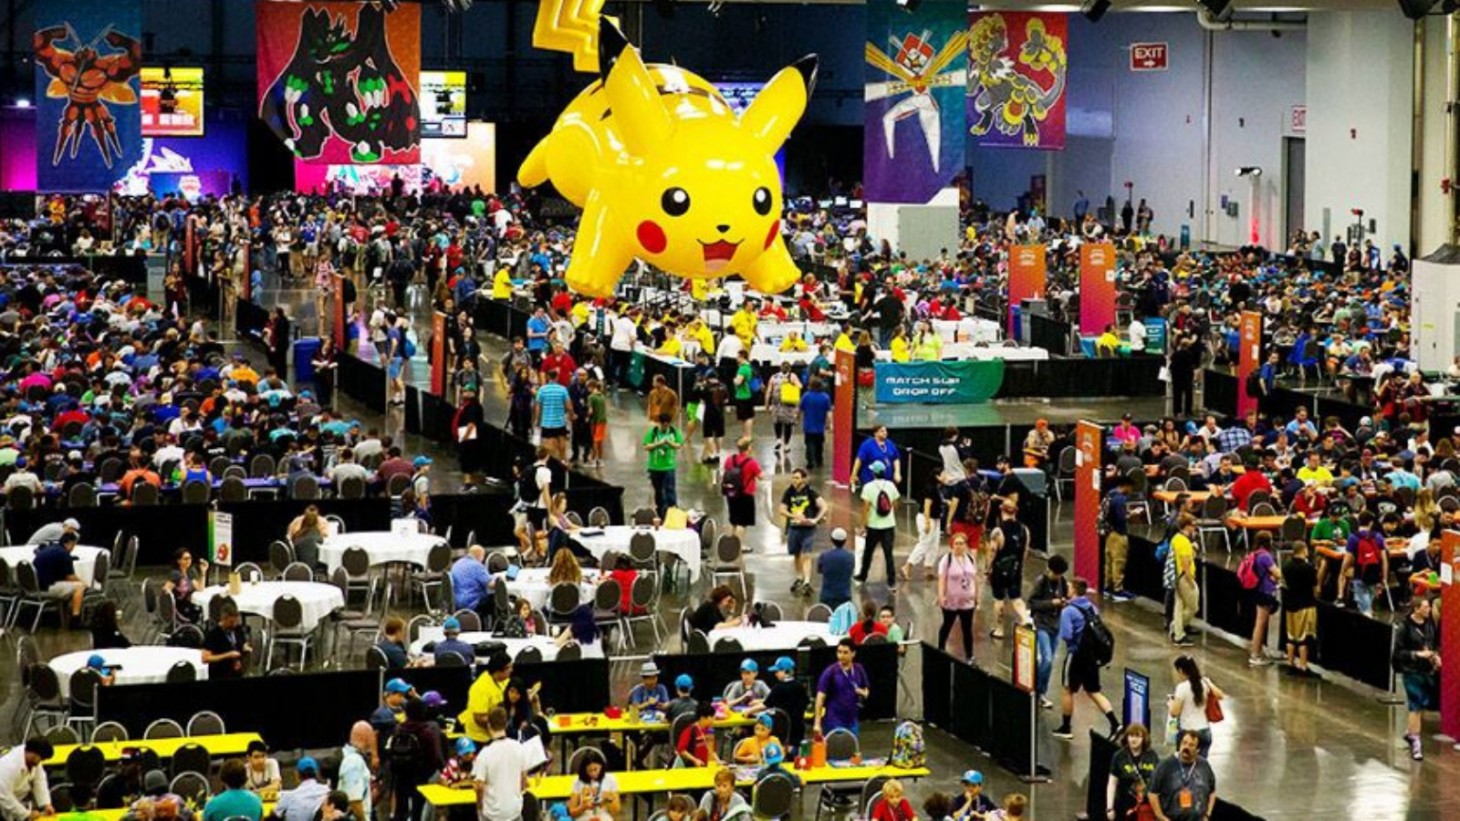 Pokémon World Championships Postponed To 2022 Due To COVID19 Concerns